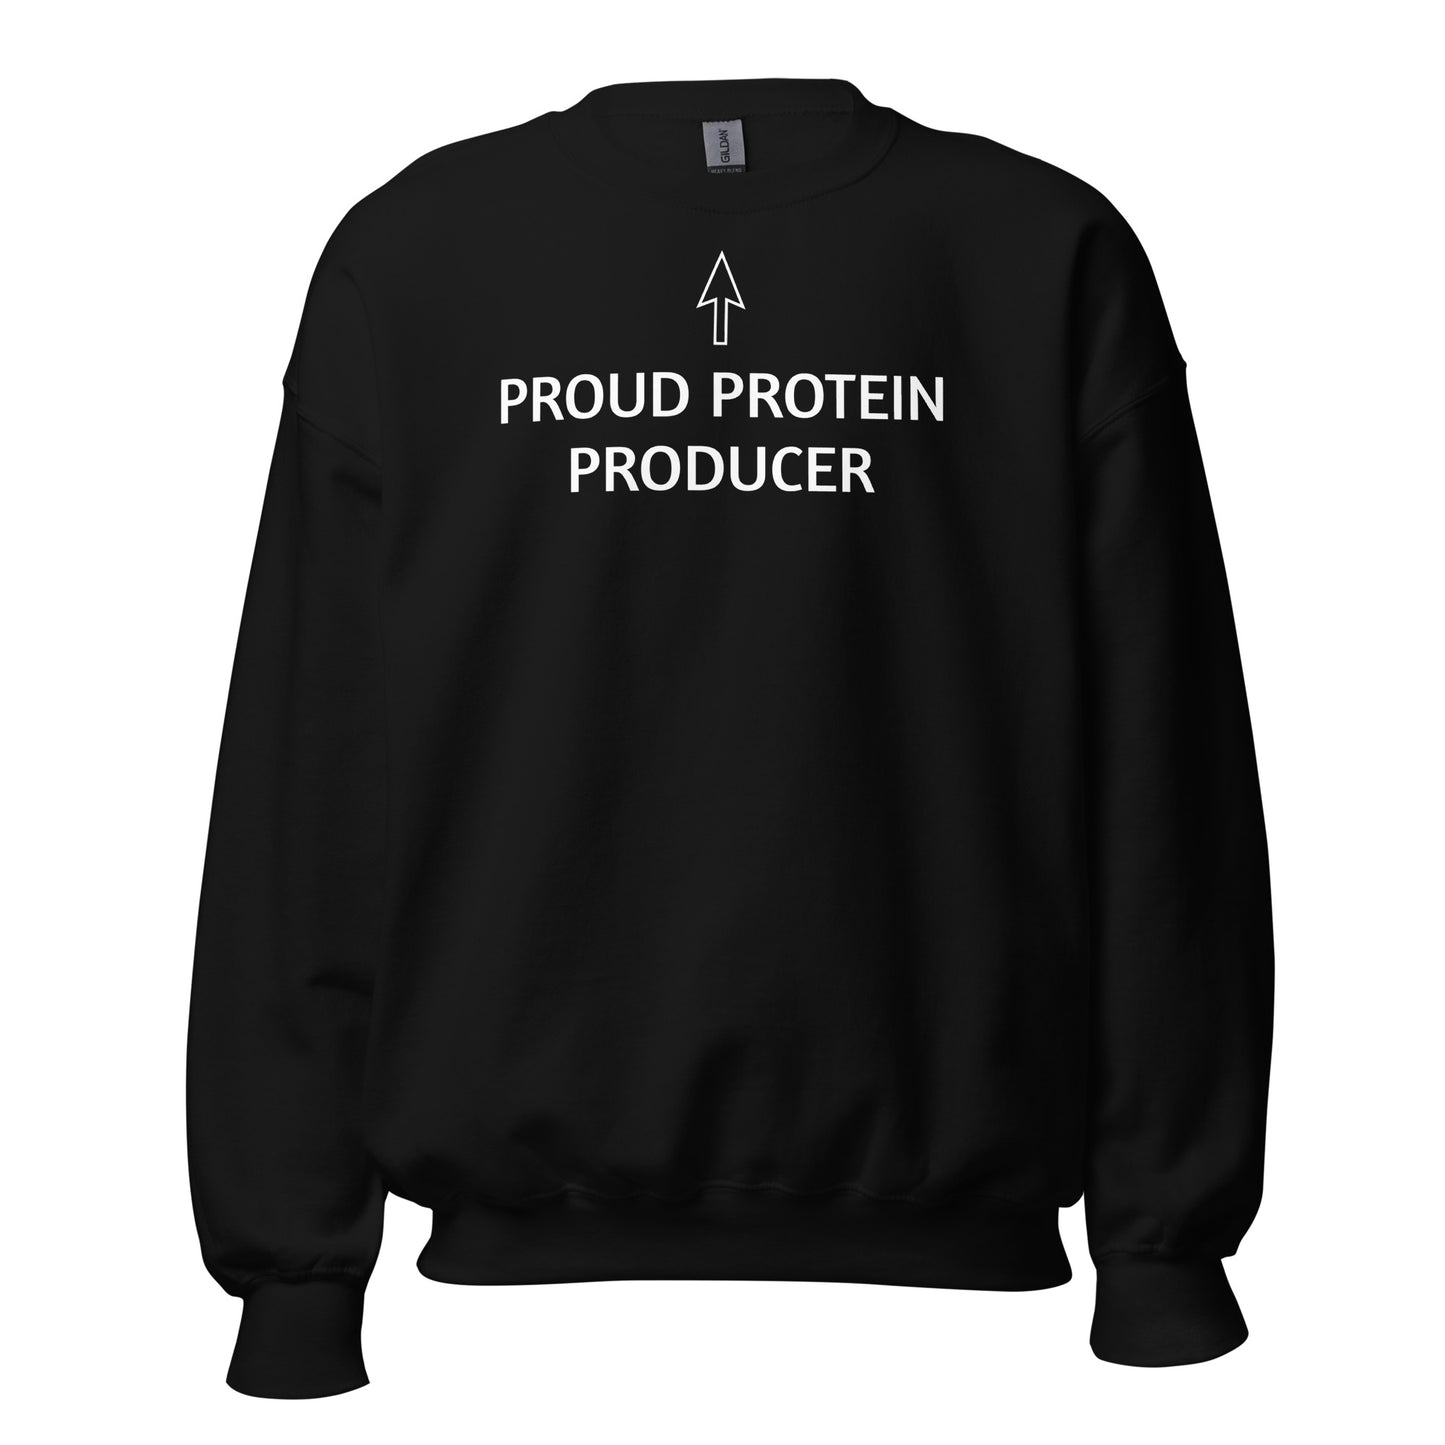 PROUD PROTEIN PRODUCER